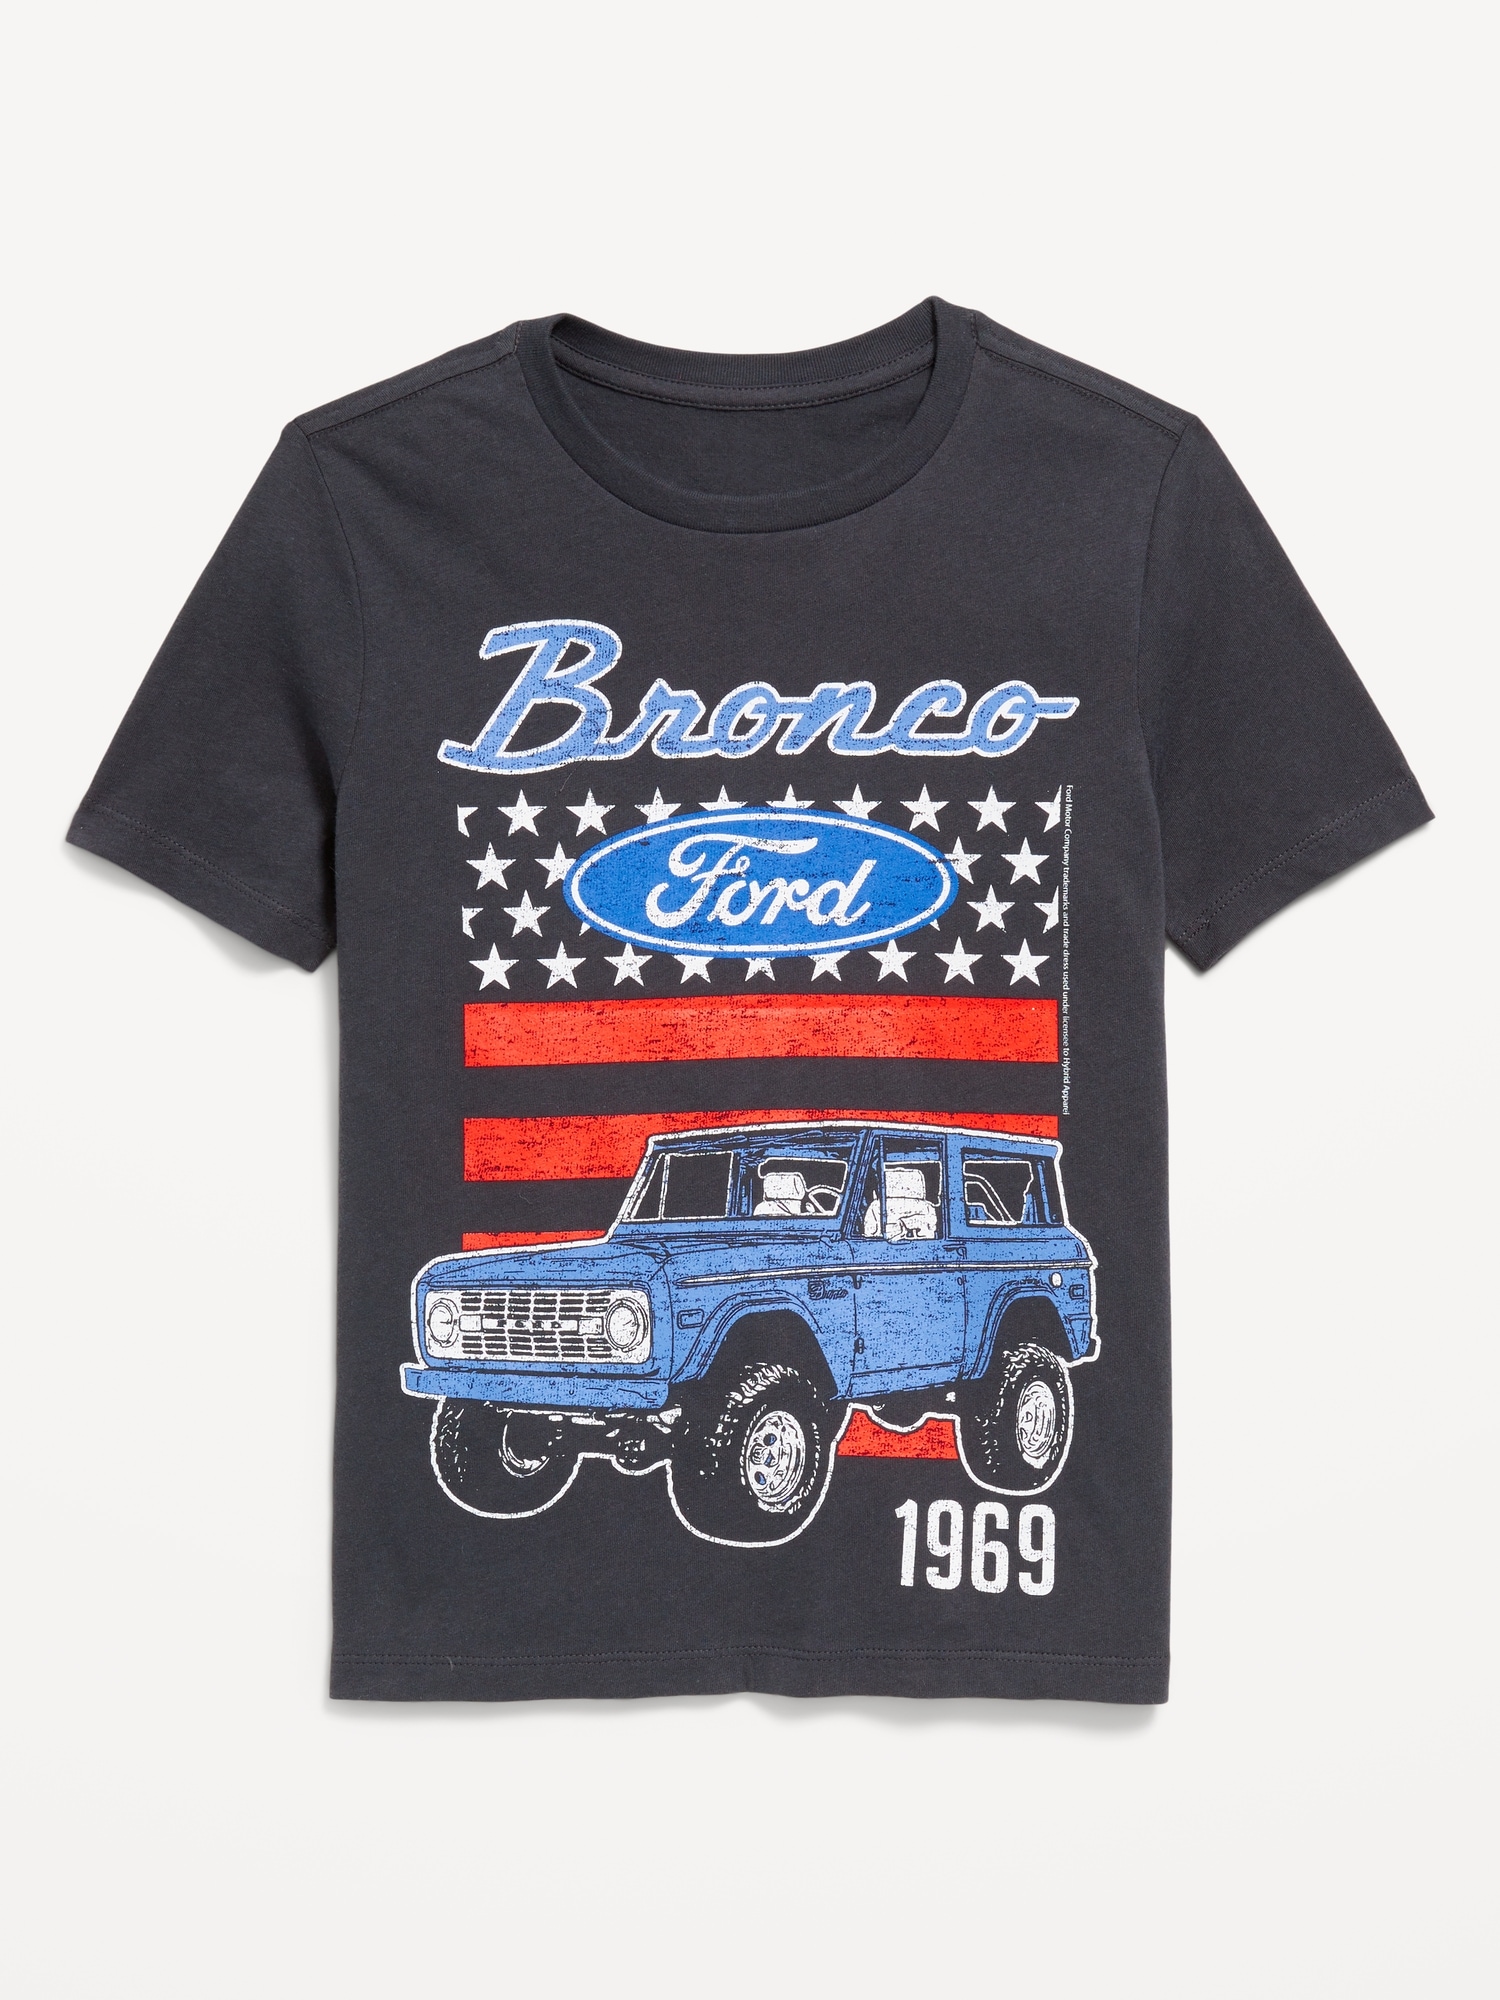 Ford Bronco™ Gender-Neutral Graphic T-Shirt for Kids